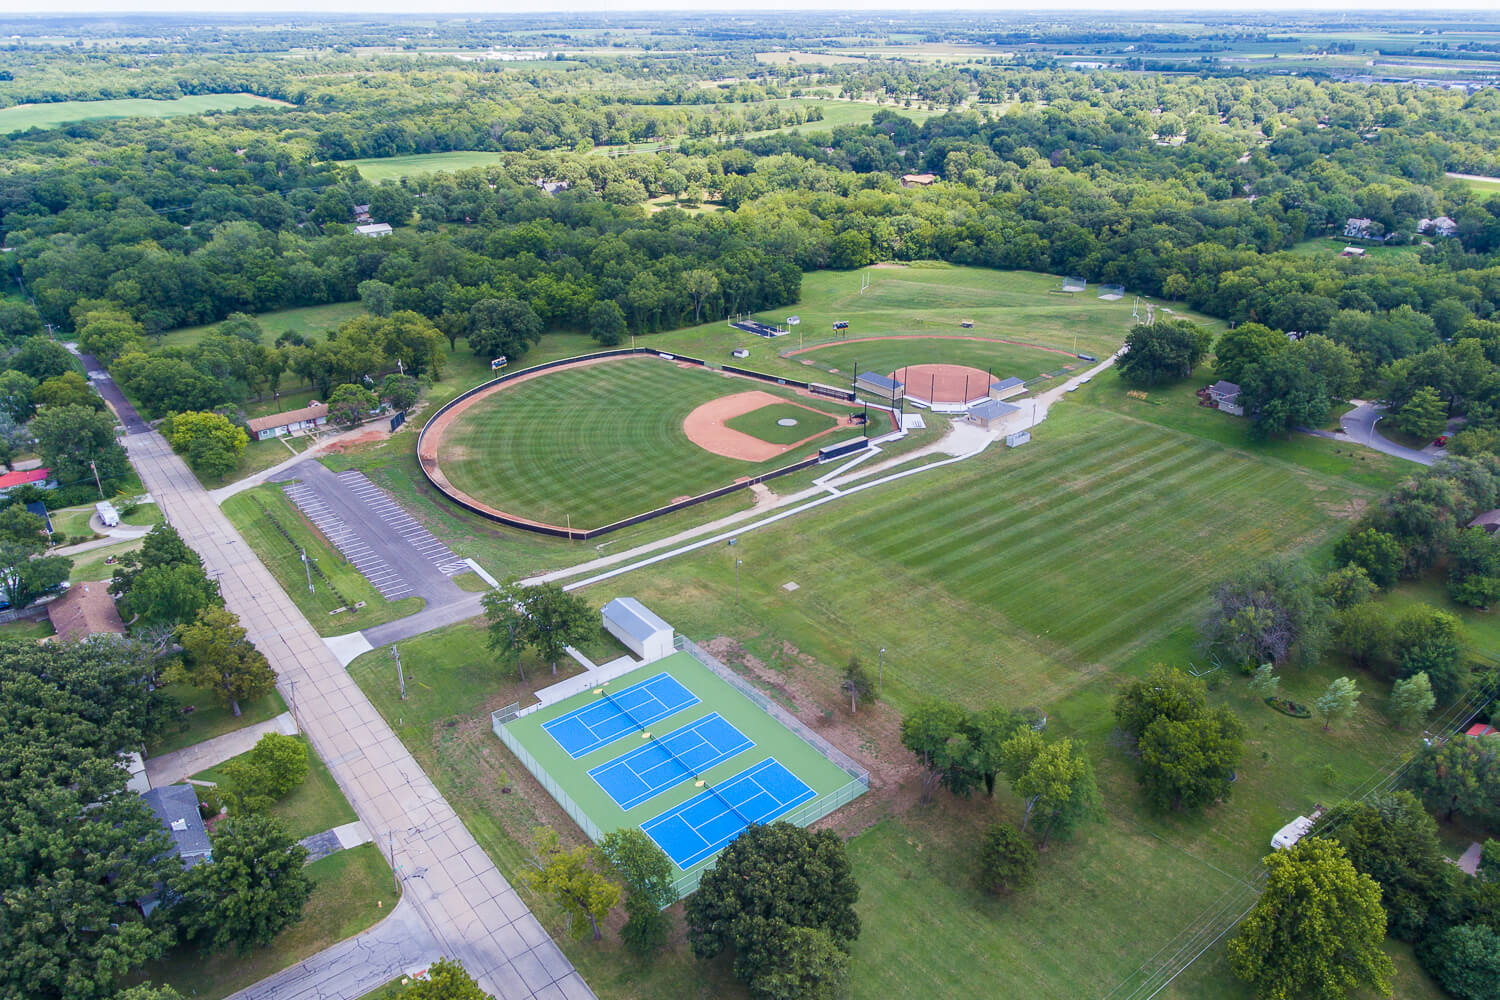 Dick Peters Sports Complex